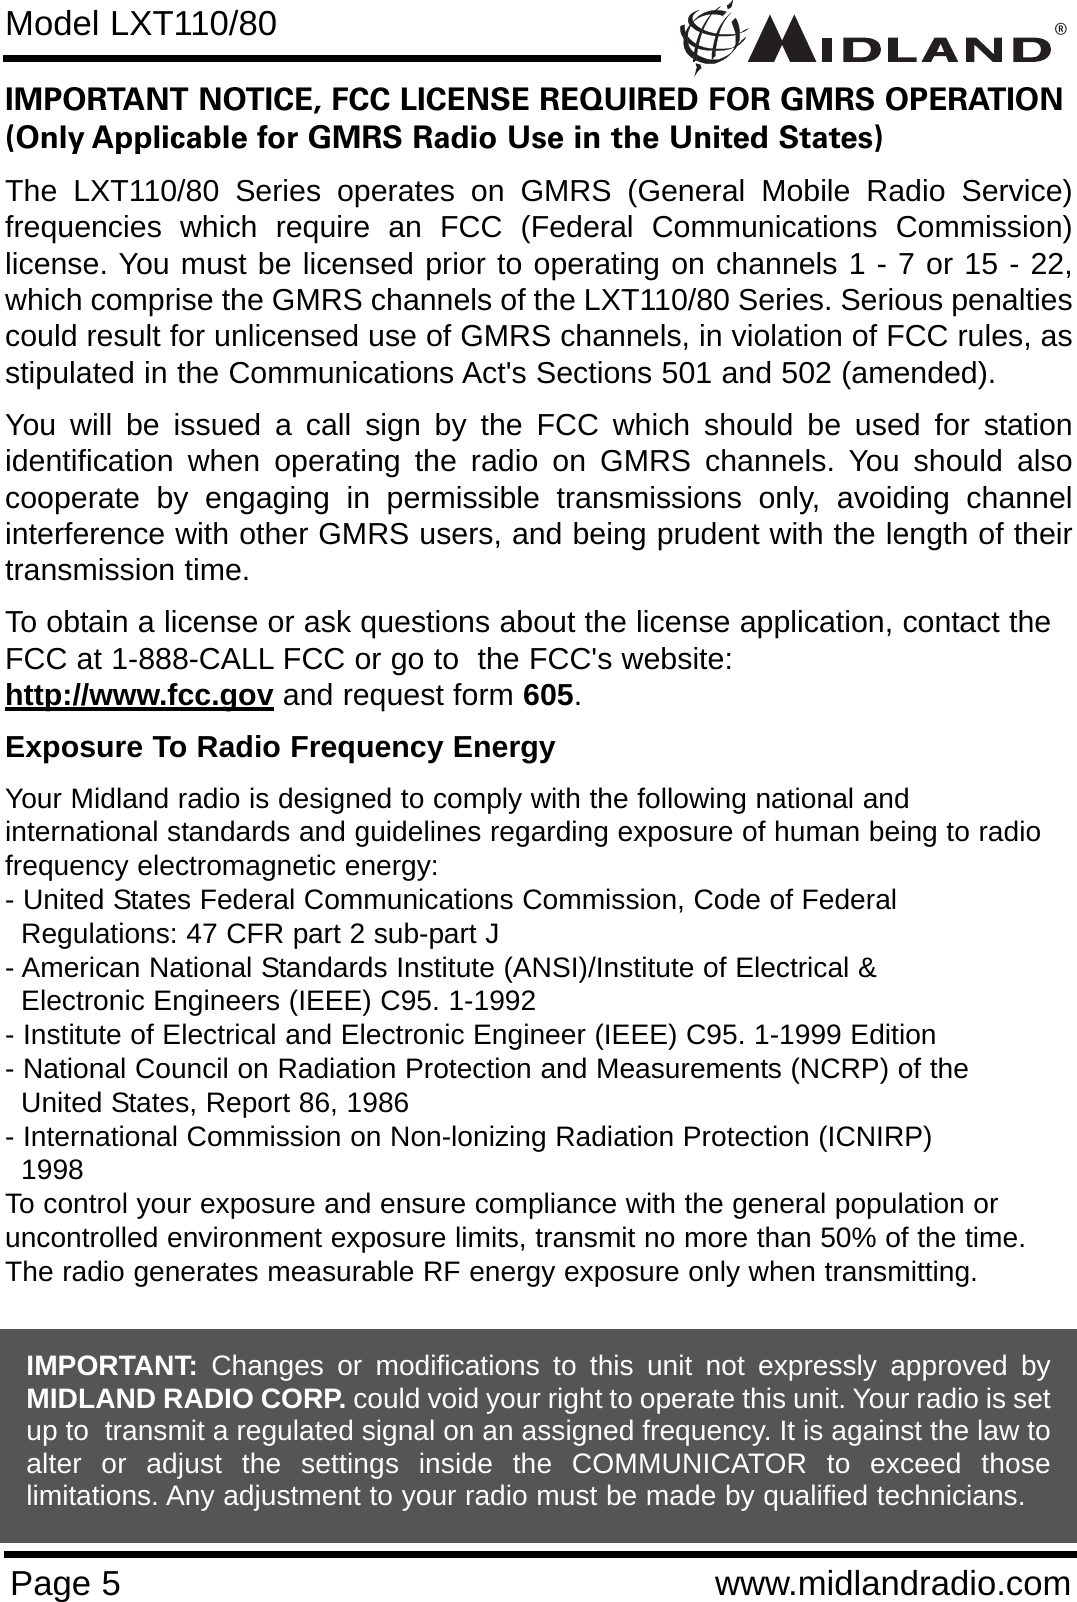 ®Page 5 www.midlandradio.comIMPORTANT NOTICE, FCC LICENSE REQUIRED FOR GMRS OPERATION(Only Applicable for GMRS Radio Use in the United States)The LXT110/80 Series operates on GMRS (General Mobile Radio Service)frequencies which require an FCC (Federal Communications Commission)license. You must be licensed prior to operating on channels 1 - 7 or 15 - 22,which comprise the GMRS channels of the LXT110/80 Series. Serious penaltiescould result for unlicensed use of GMRS channels, in violation of FCC rules, asstipulated in the Communications Act&apos;s Sections 501 and 502 (amended).You will be issued a call sign by the FCC which should be used for stationidentification when operating the radio on GMRS channels. You should alsocooperate by engaging in permissible transmissions only, avoiding channelinterference with other GMRS users, and being prudent with the length of theirtransmission time.To obtain a license or ask questions about the license application, contact theFCC at 1-888-CALL FCC or go to  the FCC&apos;s website:  http://www.fcc.gov and request form 605.Exposure To Radio Frequency EnergyYour Midland radio is designed to comply with the following national and international standards and guidelines regarding exposure of human being to radiofrequency electromagnetic energy:- United States Federal Communications Commission, Code of Federal Regulations: 47 CFR part 2 sub-part J- American National Standards Institute (ANSI)/Institute of Electrical &amp; Electronic Engineers (IEEE) C95. 1-1992- Institute of Electrical and Electronic Engineer (IEEE) C95. 1-1999 Edition- National Council on Radiation Protection and Measurements (NCRP) of the United States, Report 86, 1986- International Commission on Non-lonizing Radiation Protection (ICNIRP) 1998To control your exposure and ensure compliance with the general population oruncontrolled environment exposure limits, transmit no more than 50% of the time.The radio generates measurable RF energy exposure only when transmitting.Model LXT110/80IMPORTANT: Changes or modifications to this unit not expressly approved byMIDLAND RADIO CORP. could void your right to operate this unit. Your radio is setup to  transmit a regulated signal on an assigned frequency. It is against the law toalter or adjust the settings inside the COMMUNICATOR to exceed thoselimitations. Any adjustment to your radio must be made by qualified technicians.